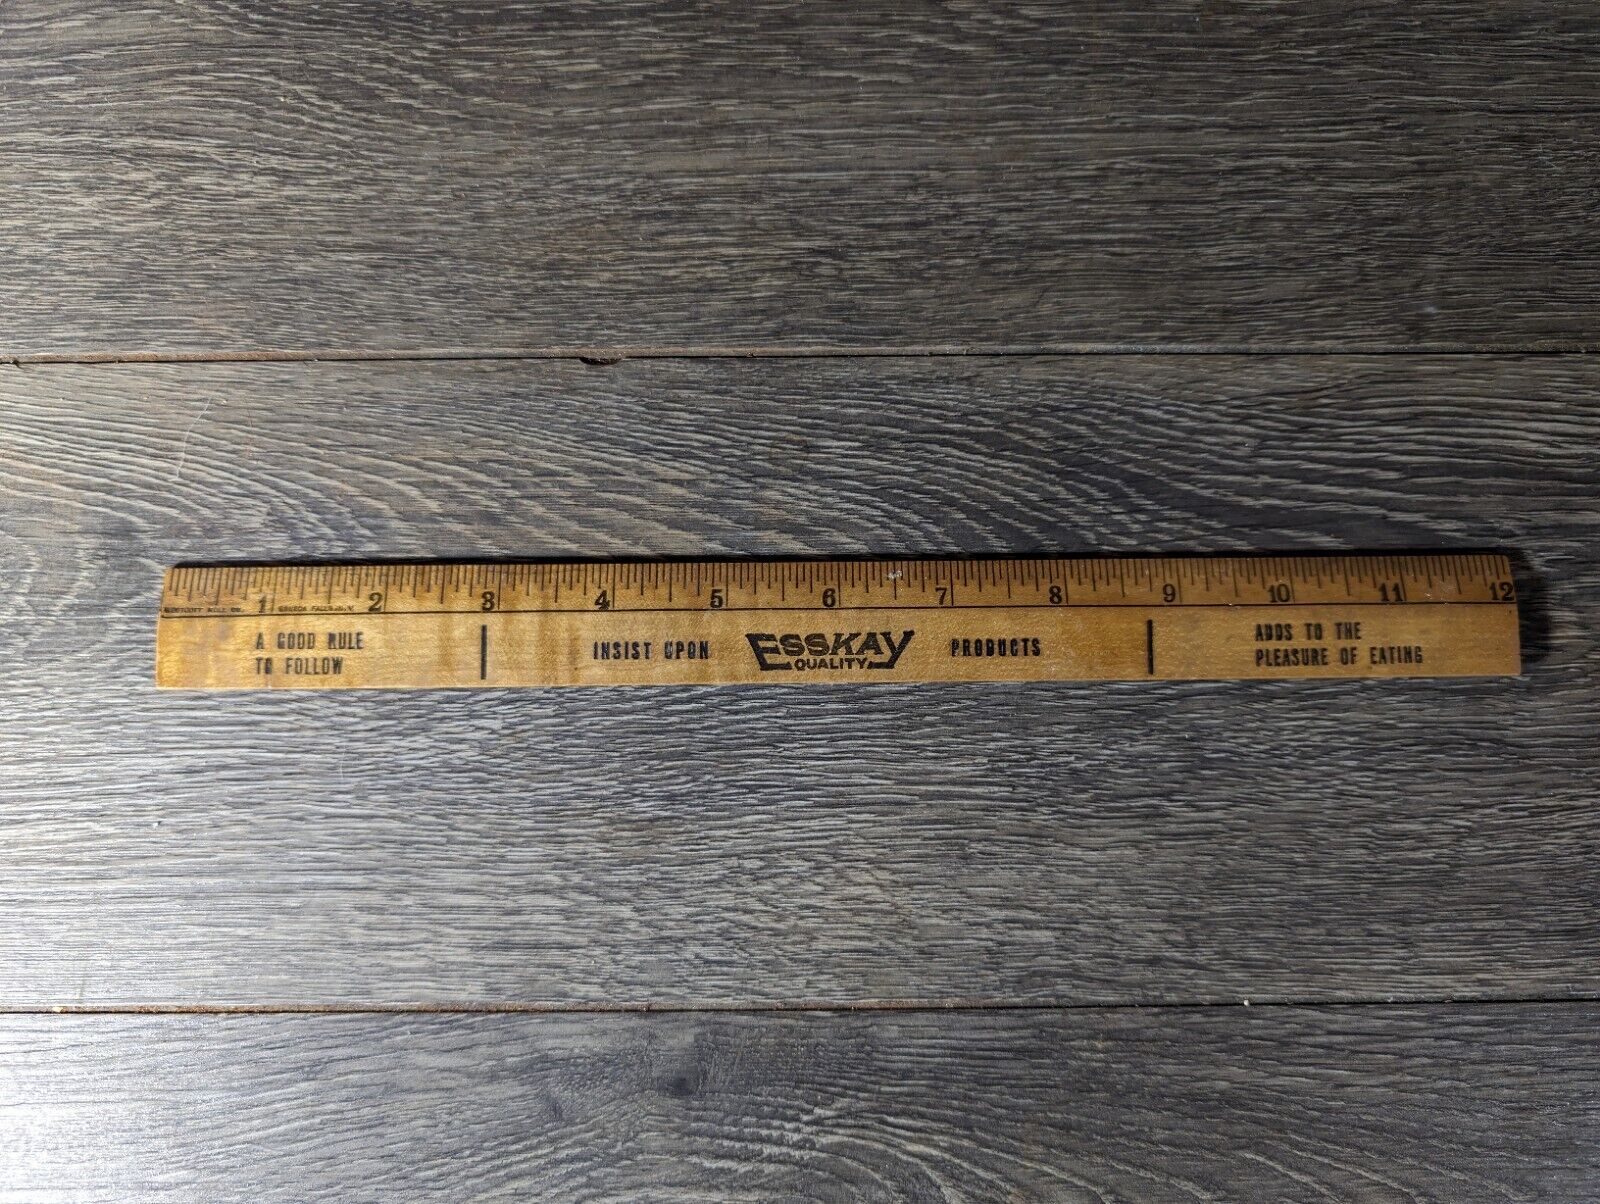 Vintage Esskay Quality Meats Hot Dogs Baltimore MD Wooden Advertising Ruler  12”